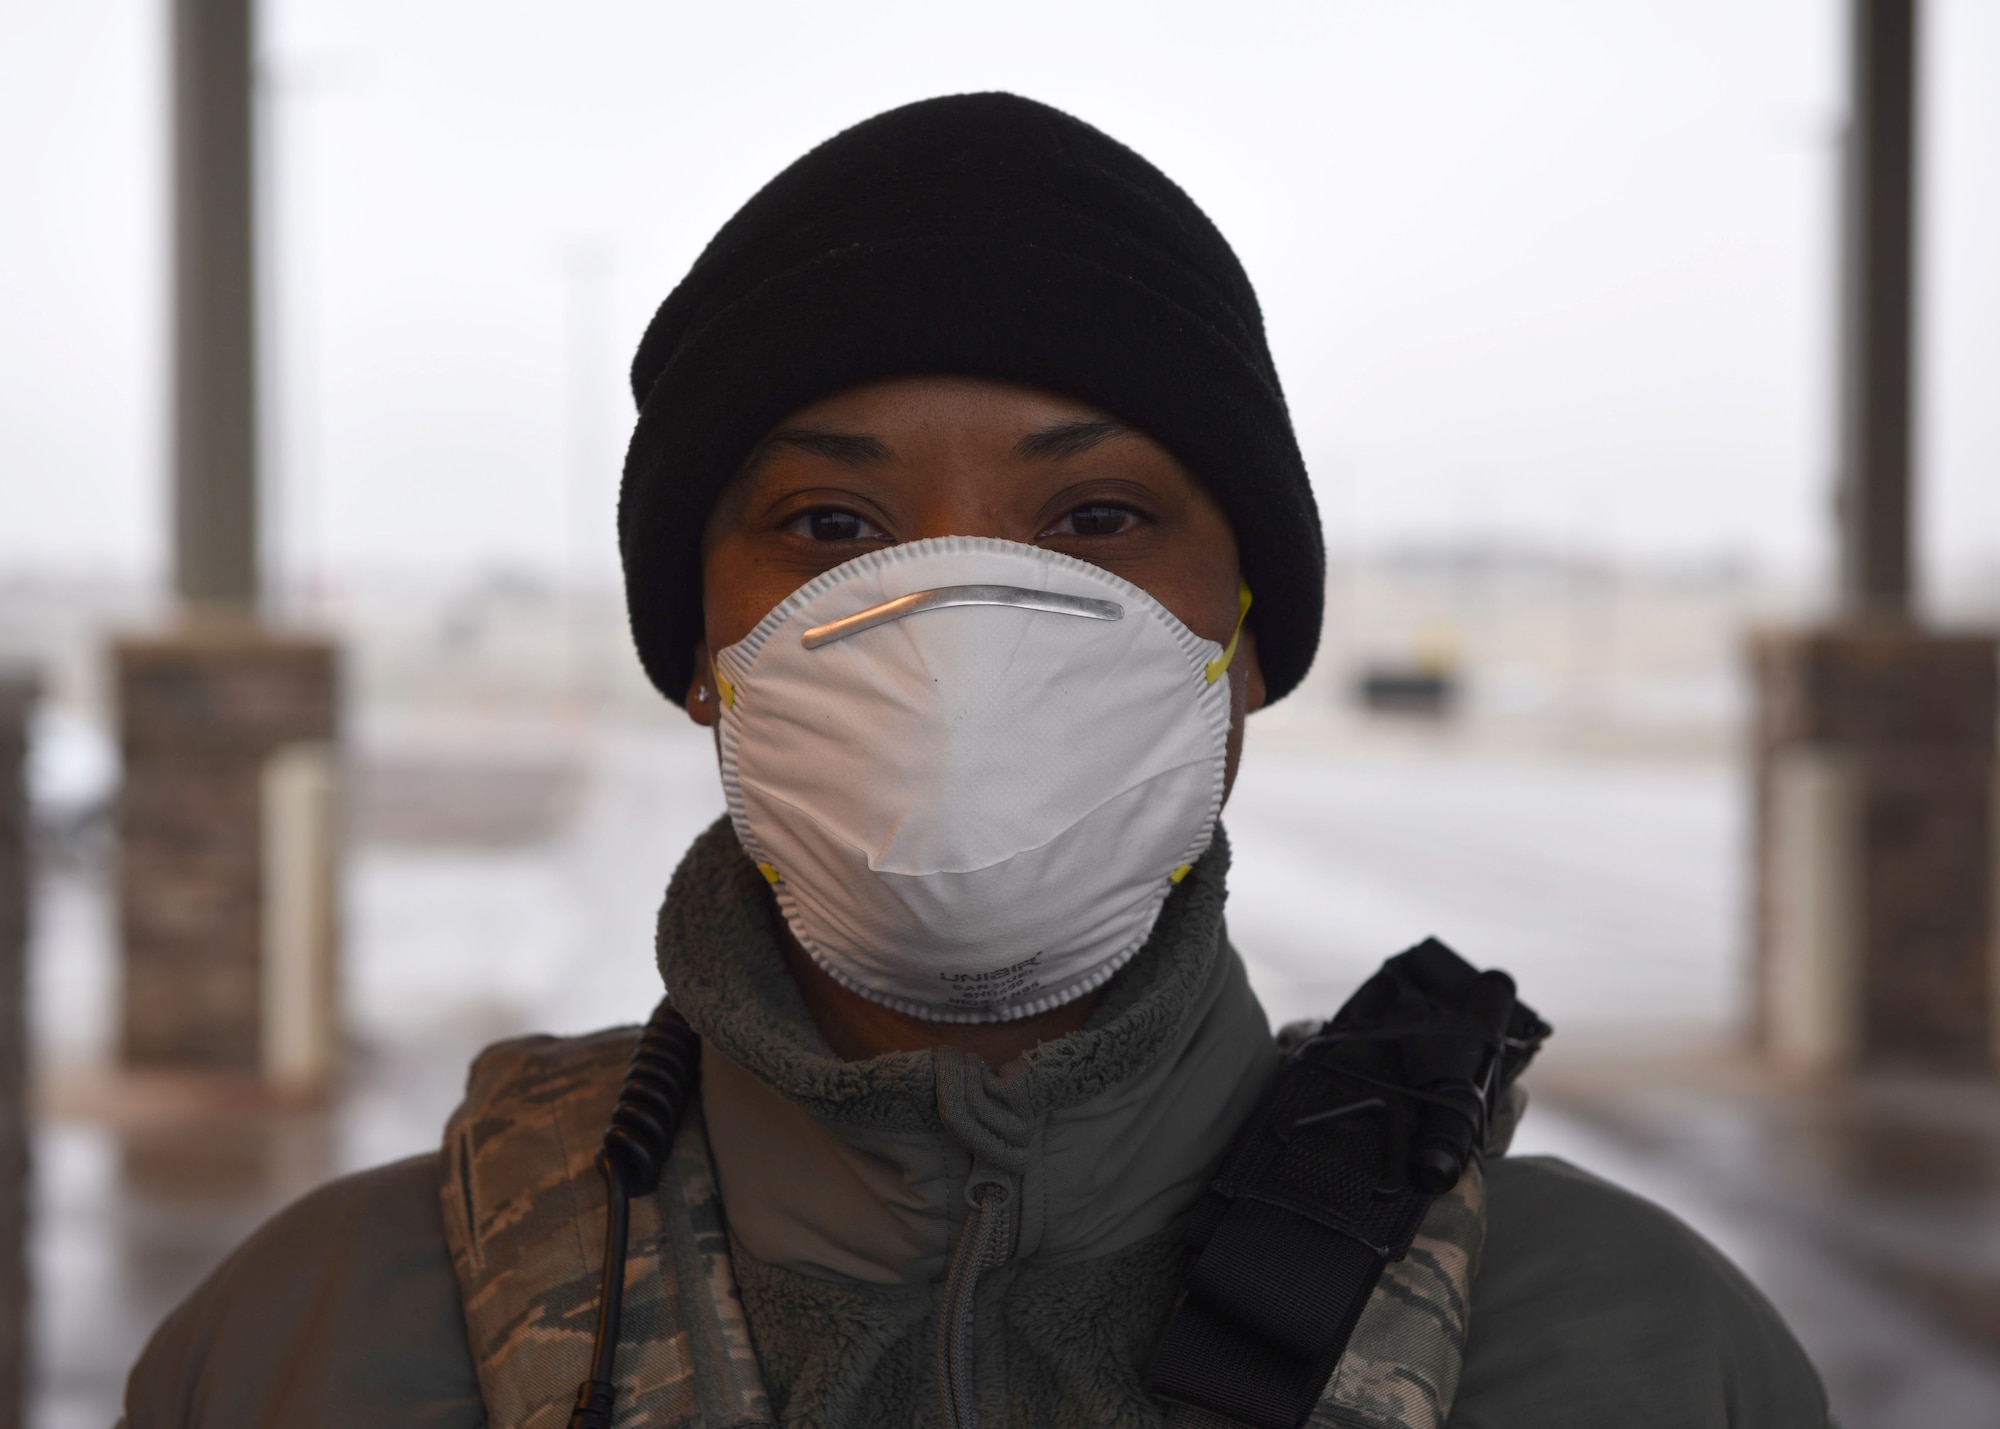 U.S. Air Force Airman 1st Class Laurente Drake, 460th Security Forces Squadron member, poses for a photo on April 2, 2020 at Buckley Air Force Base, Colo. Buckley AFB is currently in Health Protection Condition level Charlie in response to the spread of COVID-19 in the state of Colorado and to Members manning the gate are required to wear personal protective equipment and practice proper social distancing due to the risks associated with COVID-19. The HPCON Charlie defines base measures for a substantial disease threat and ensures Team Buckley is using the proper protocols and processes to prevent transmission. (U.S. Air Force photo by Airman 1st Class Haley N. Blevins)